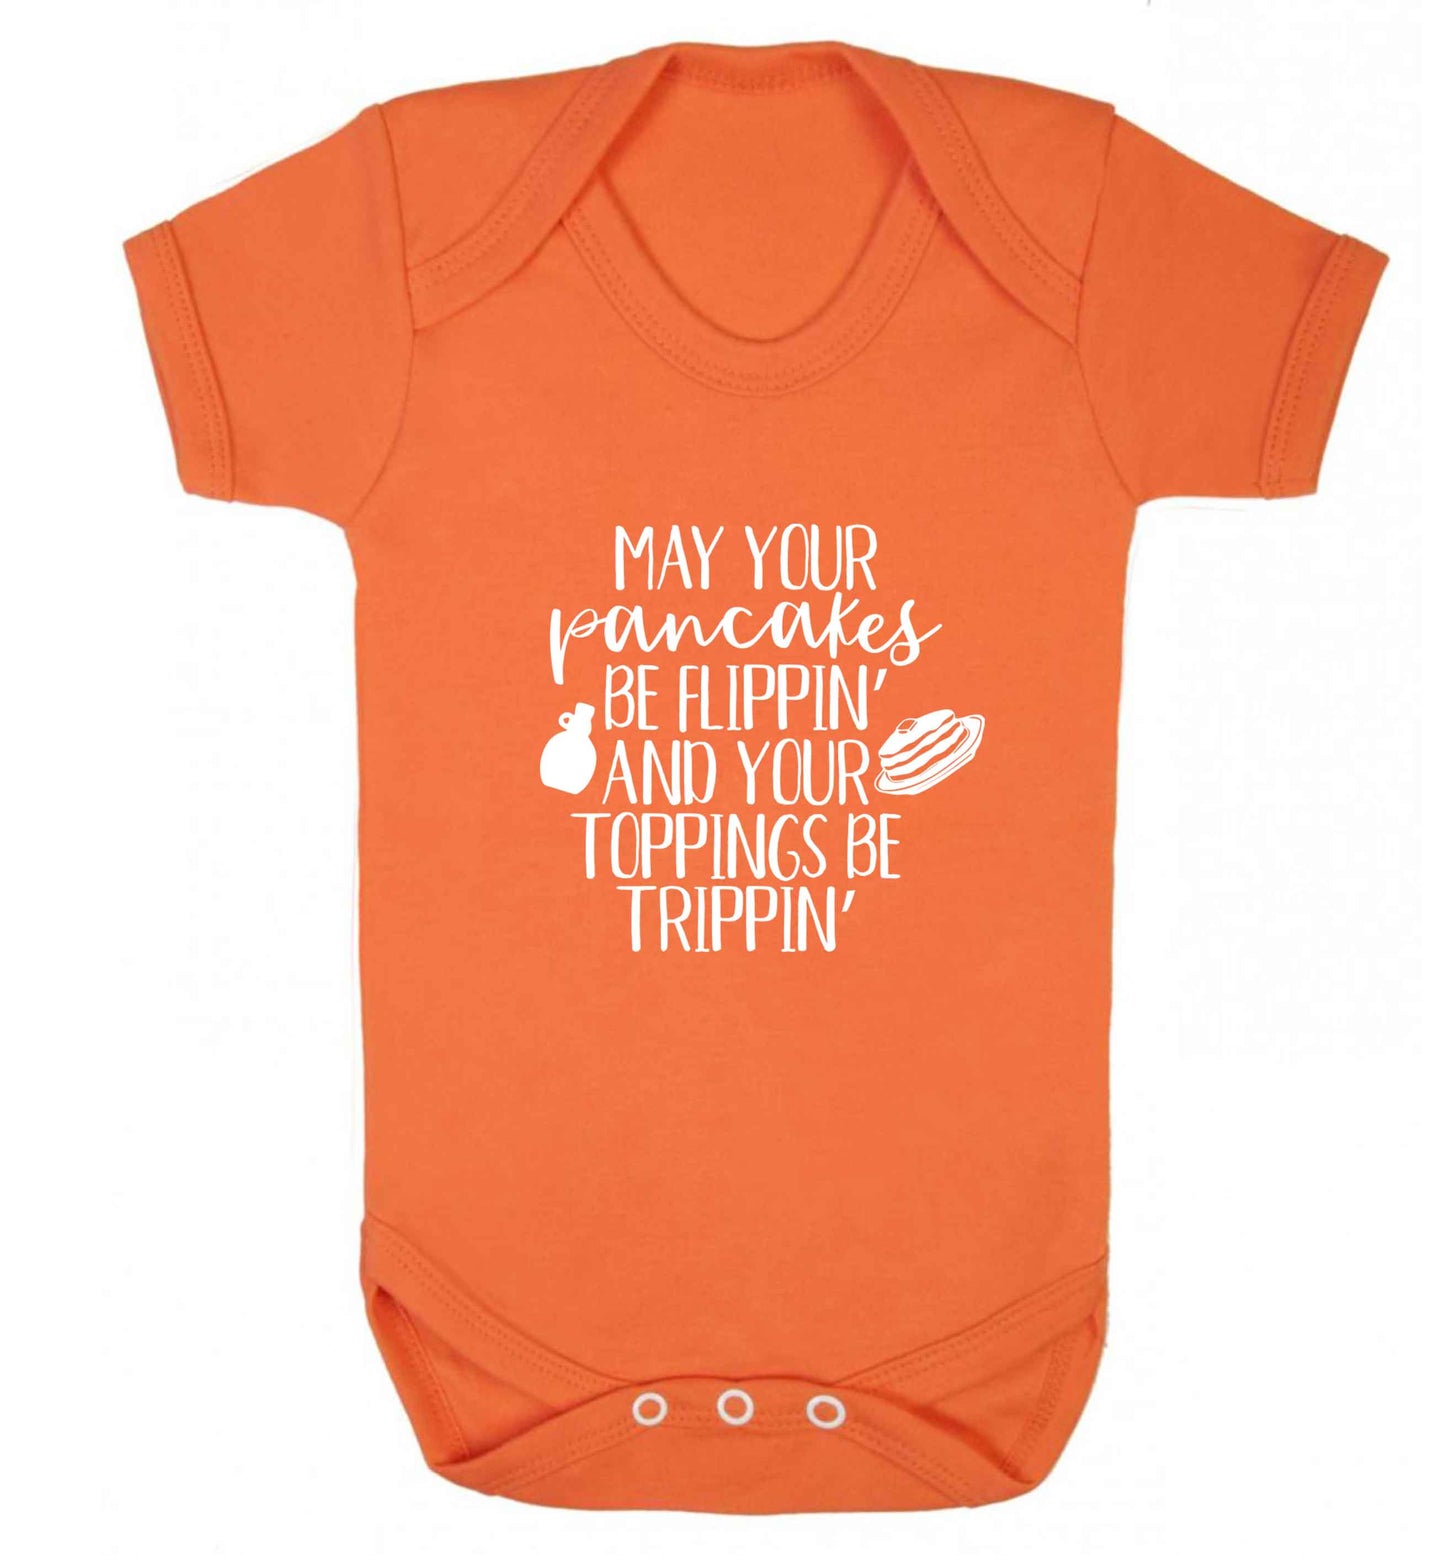 May your pancakes be flippin' and your toppings be trippin' baby vest orange 18-24 months